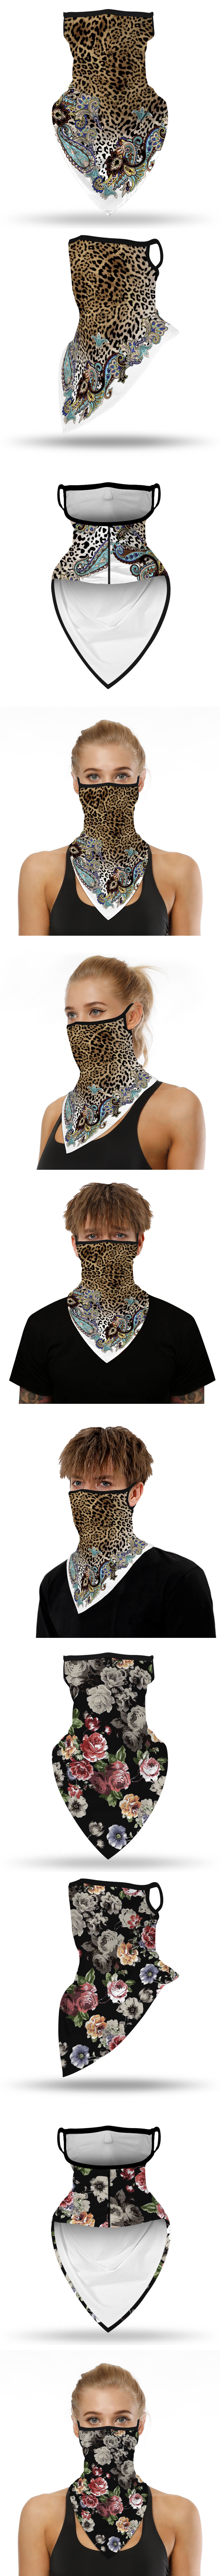 Digital-Printed-Polyester-Breathable-Face-Cover-Windproof-Sun-UV-Protection-Neck-Gaiter-Dustproof-He-1677735-3